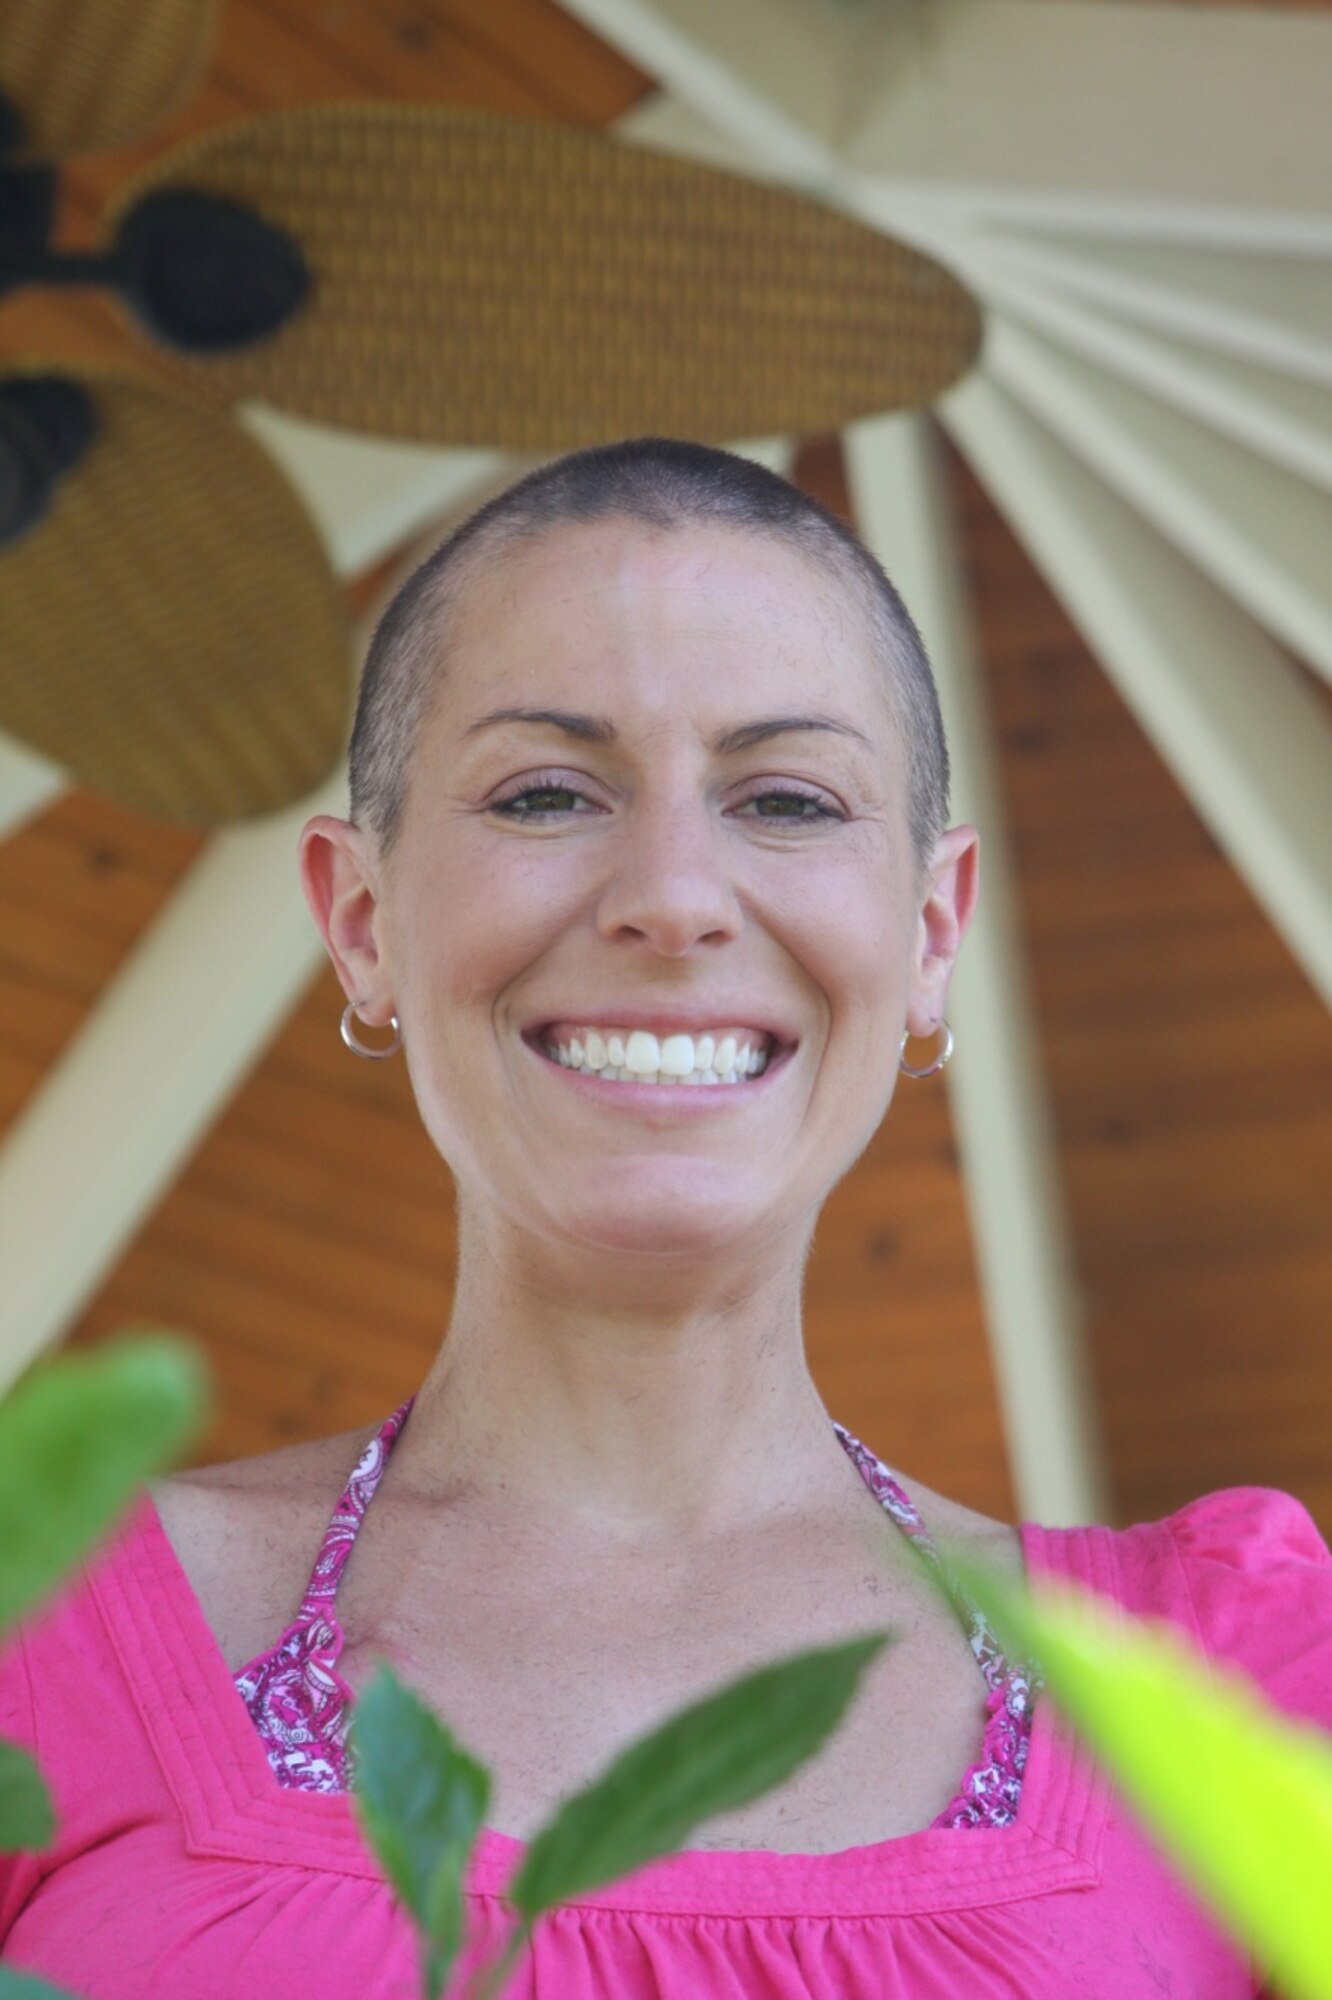 Sara Sullivan, late wife of U.S. Air Force Maj. Bradley Sullivan, 480th Fighter Squadron F-16 Fighting Falcon pilot, Spangdahlem Air Base, is pictured here in Marble Falls, TX, after chemotherapy treatment for breast cancer. Sara passed away two weeks after giving birth to their first child, Chloe Grace in 2009. Sullivan raised his daughter as a single parent with the help of friends and family of the Air Force community for the first two years of her life. (Courtesy Photo/Released)